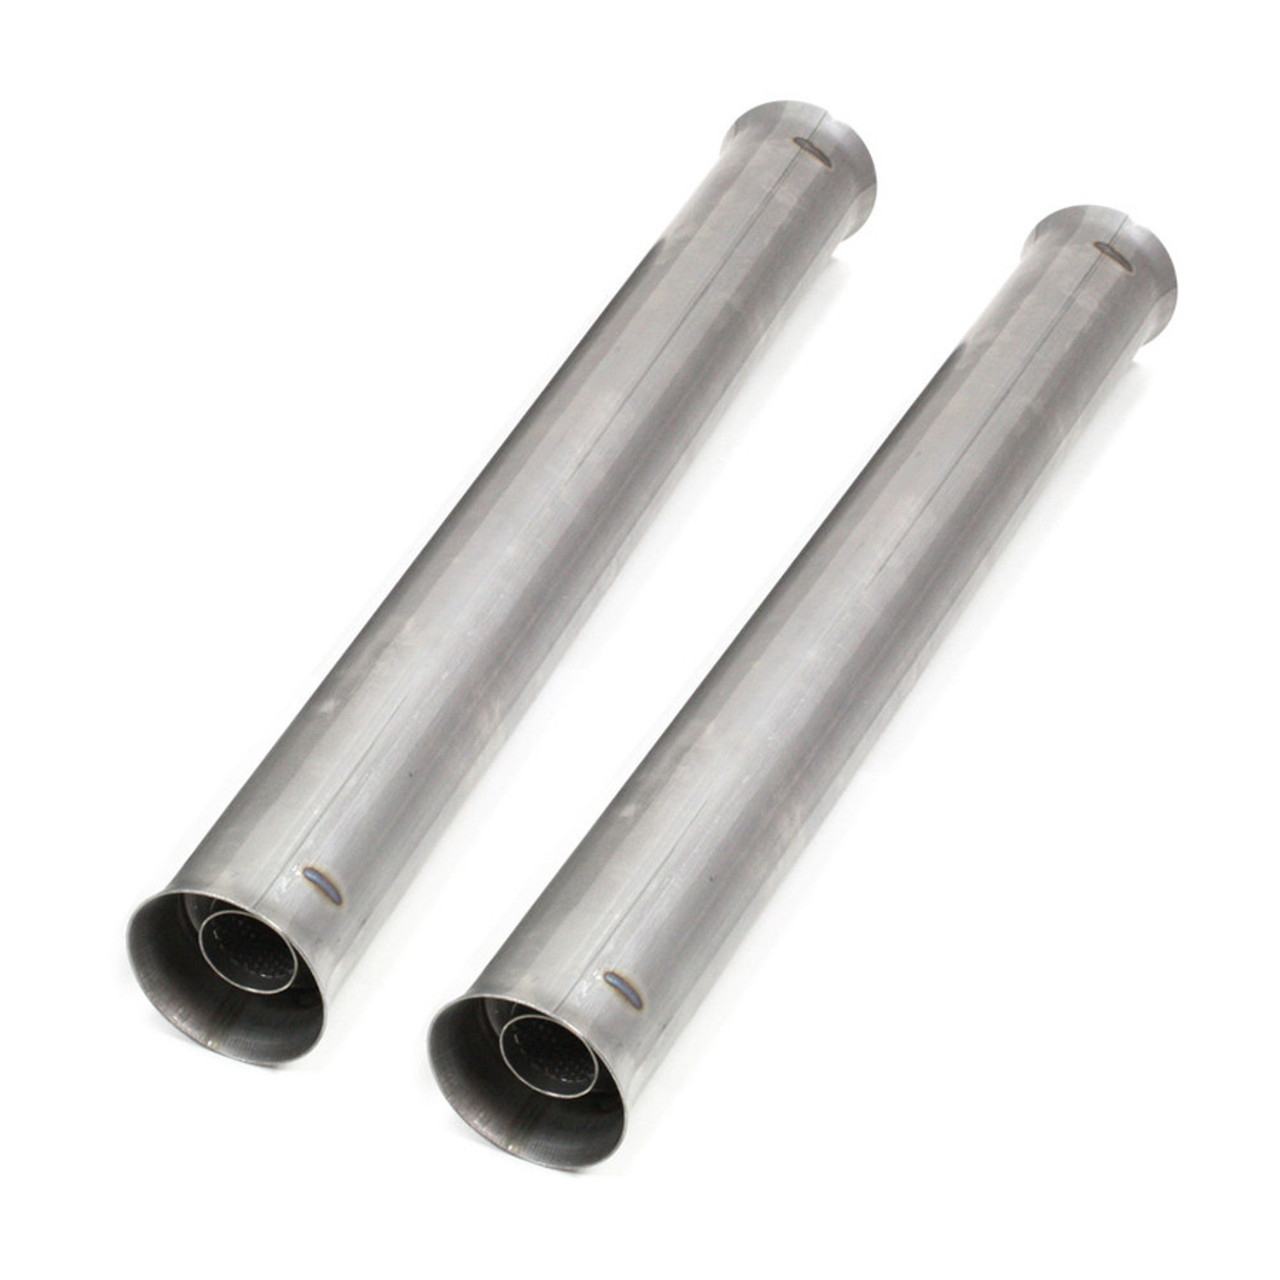 Dougs Max Flow Muffler Side Pipe Inserts - DGHD952